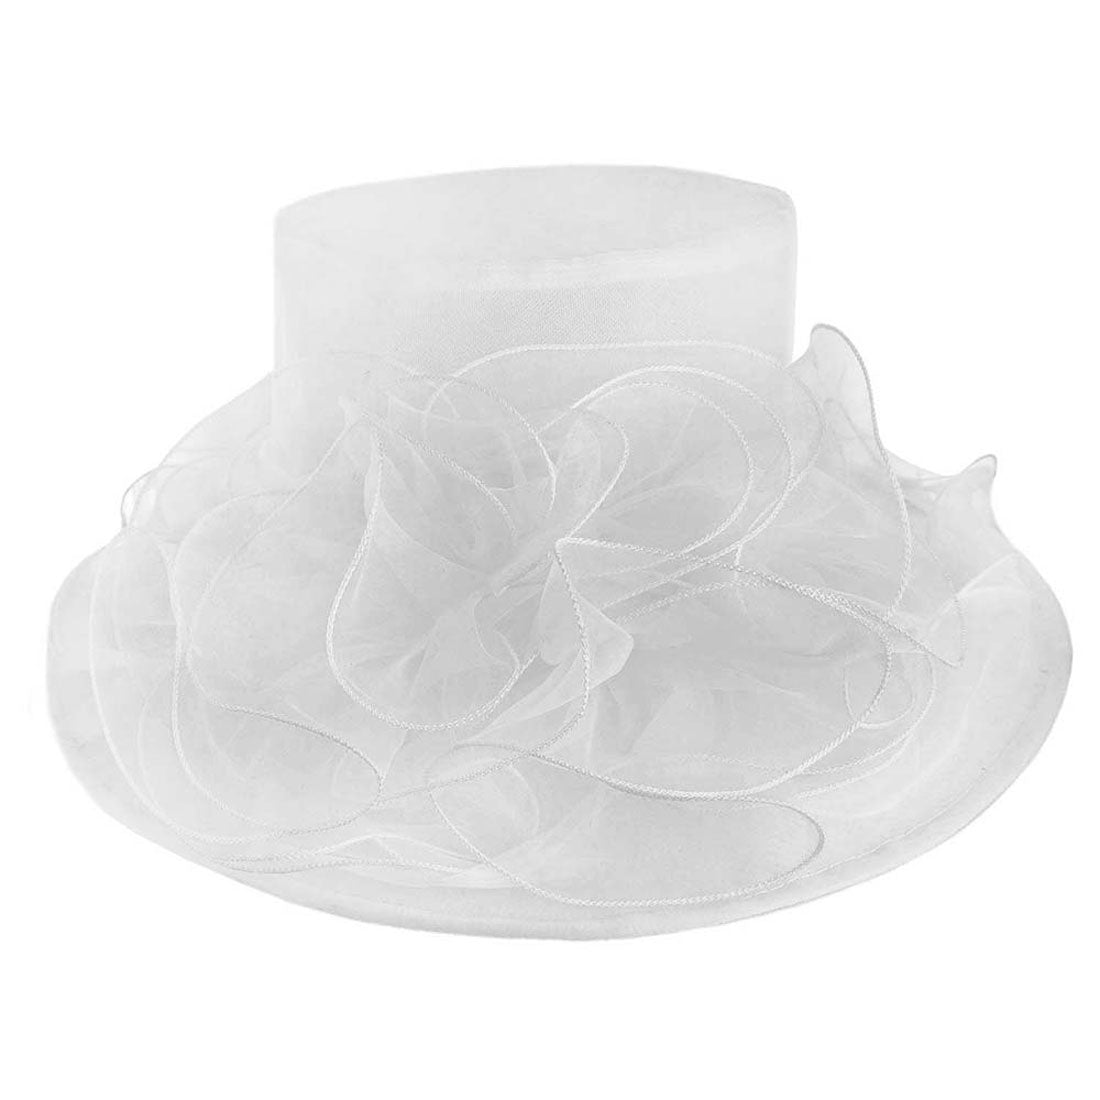 White Flower Accented Dressy Hat. Stylish Stunning ladies hat designed with a Feather Mesh Dressy hat, noble, delicate feathers and easy wearing also add glamour and fancy charming. Suitable for photography, costume party, bridal party, wedding, church, cocktail party and tea party ,Wear it to parties, weddings, Performance or any Events any Special Occasion.